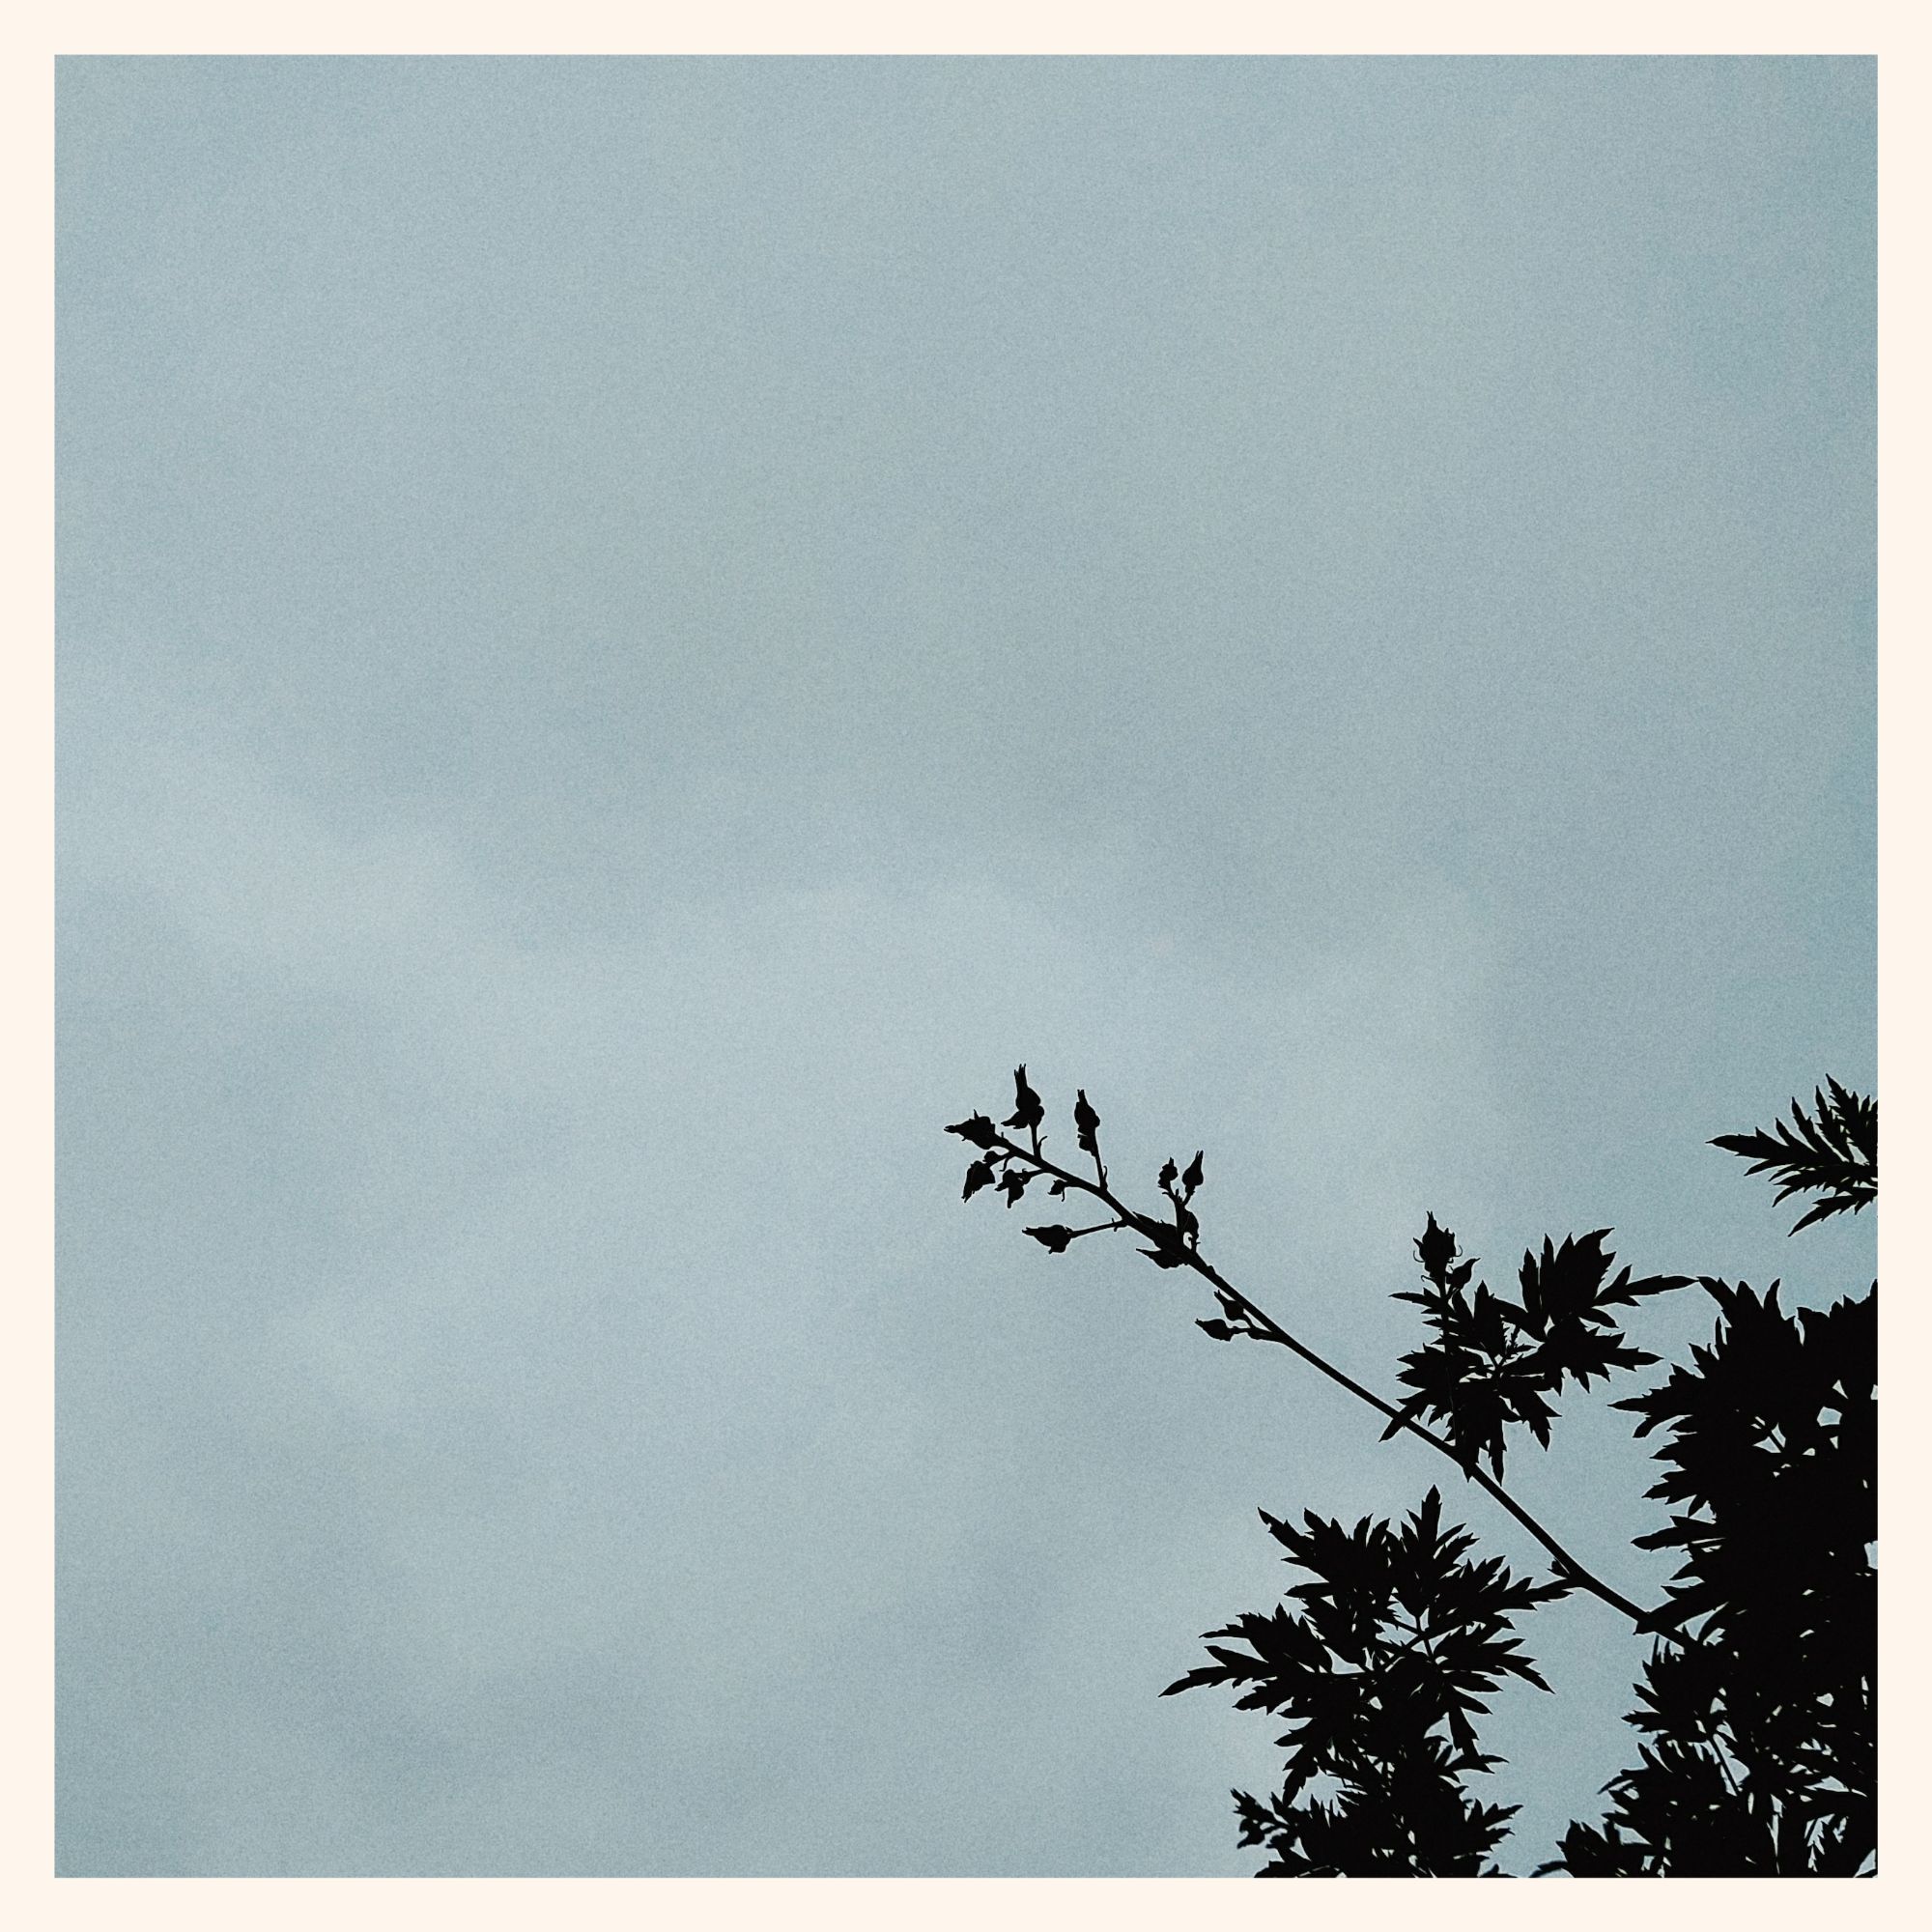 Blackberry branches in front of an almost unstructured sky.